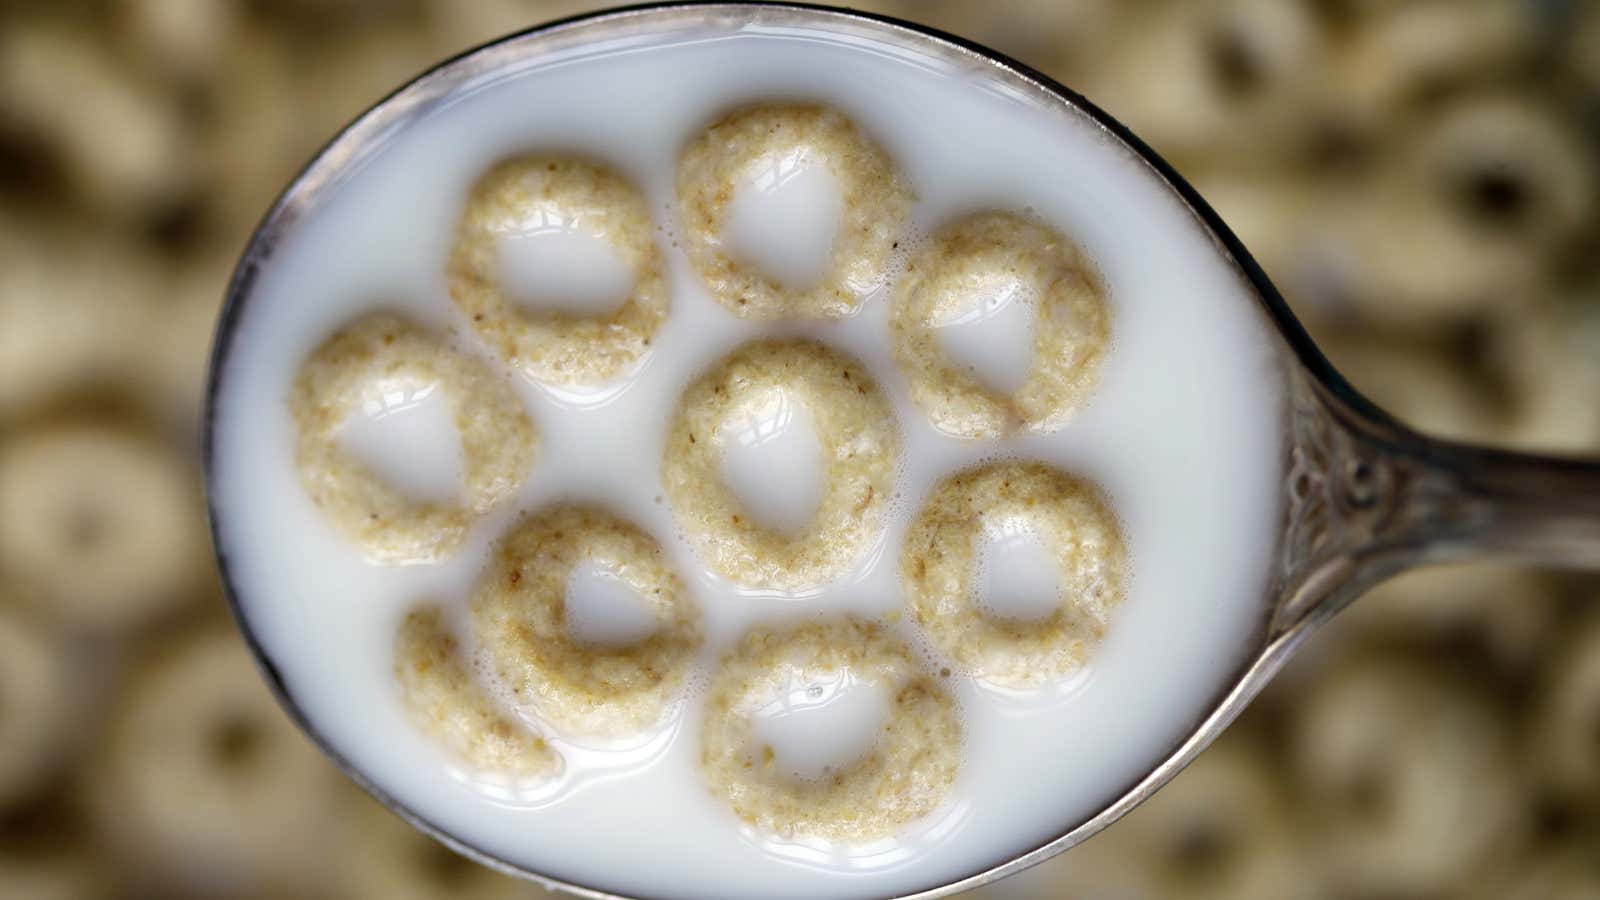 General Mills saw a sales bump for its healthier products.